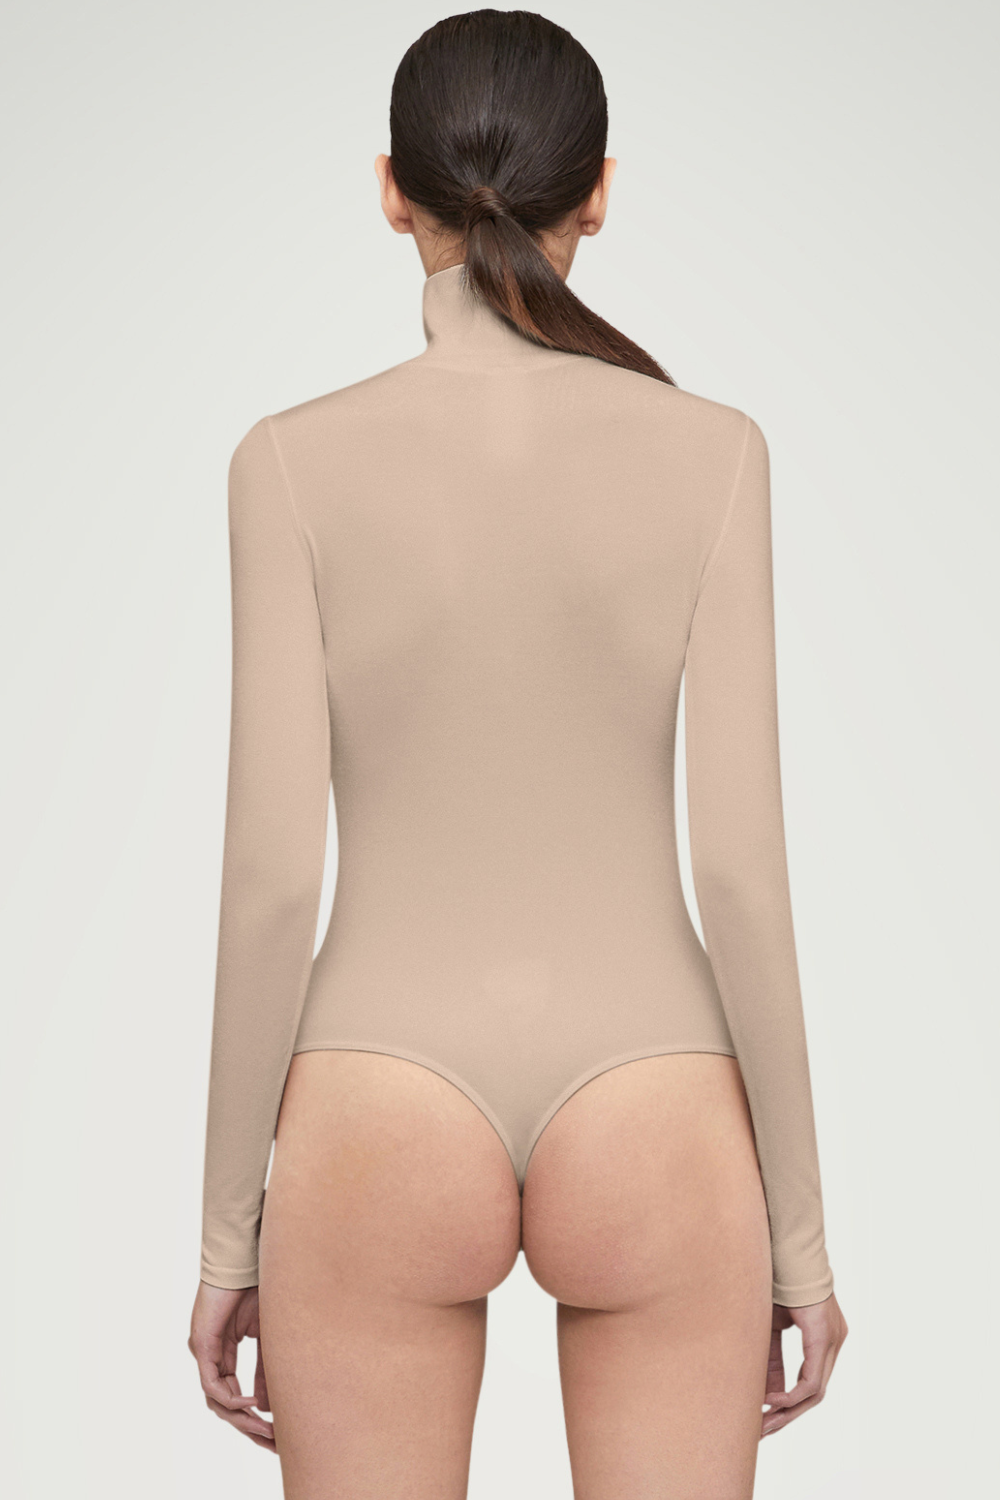 https://www.naughtyknickers.co.uk/cdn/shop/files/wolford-colorado-body-75083-cafe-au-lait-2.png?v=1706788797